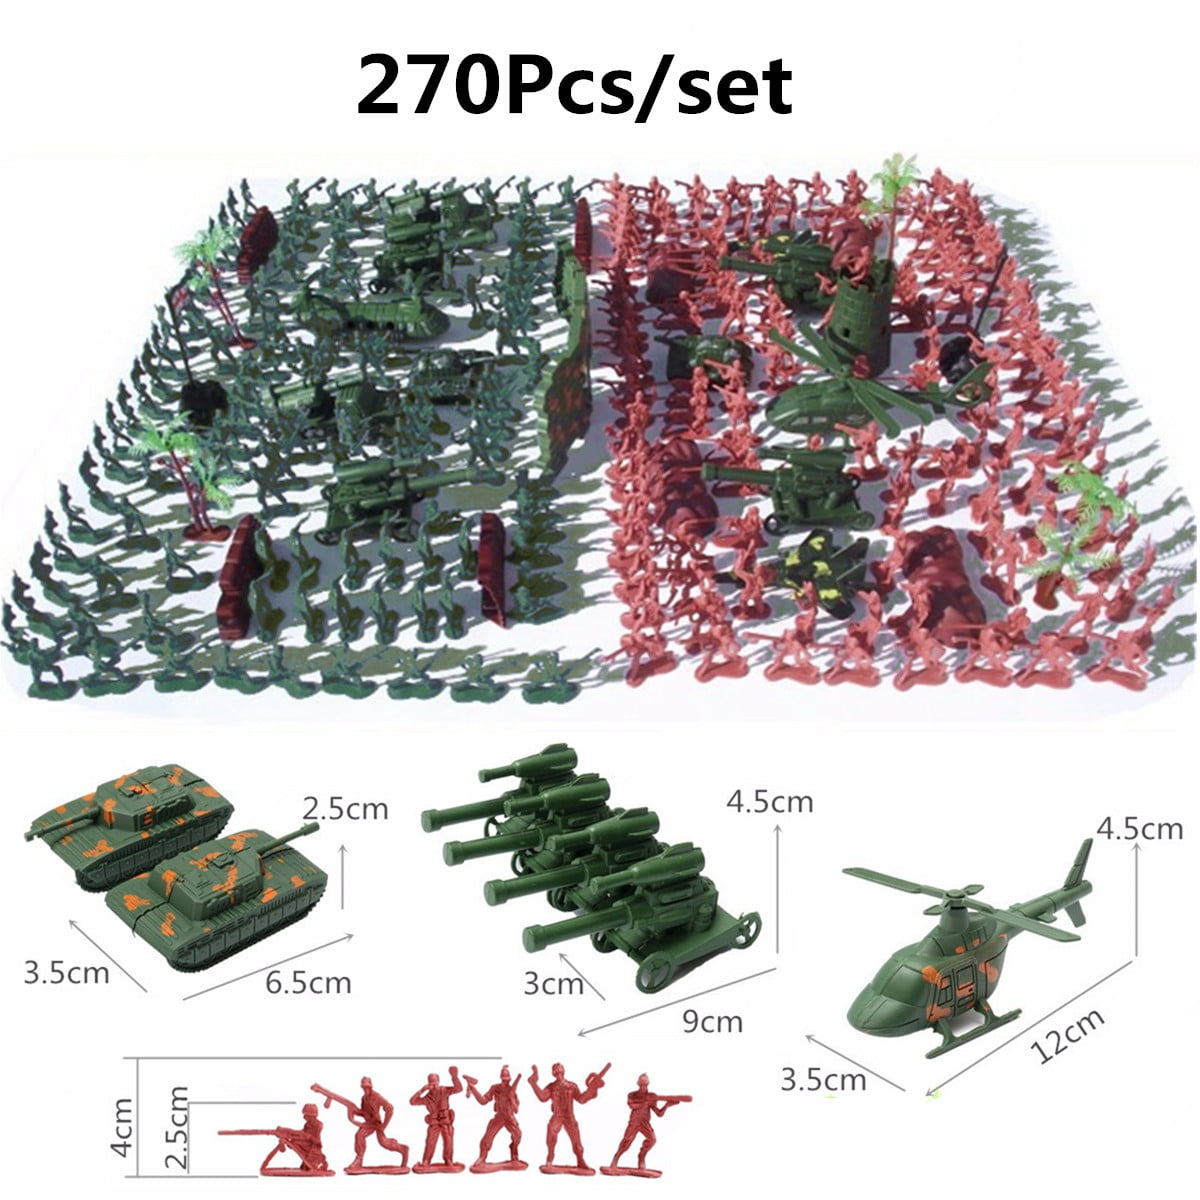 290pcs Plastic Military Playset Toy 4cm Soldiers Army Figures & Accessories 